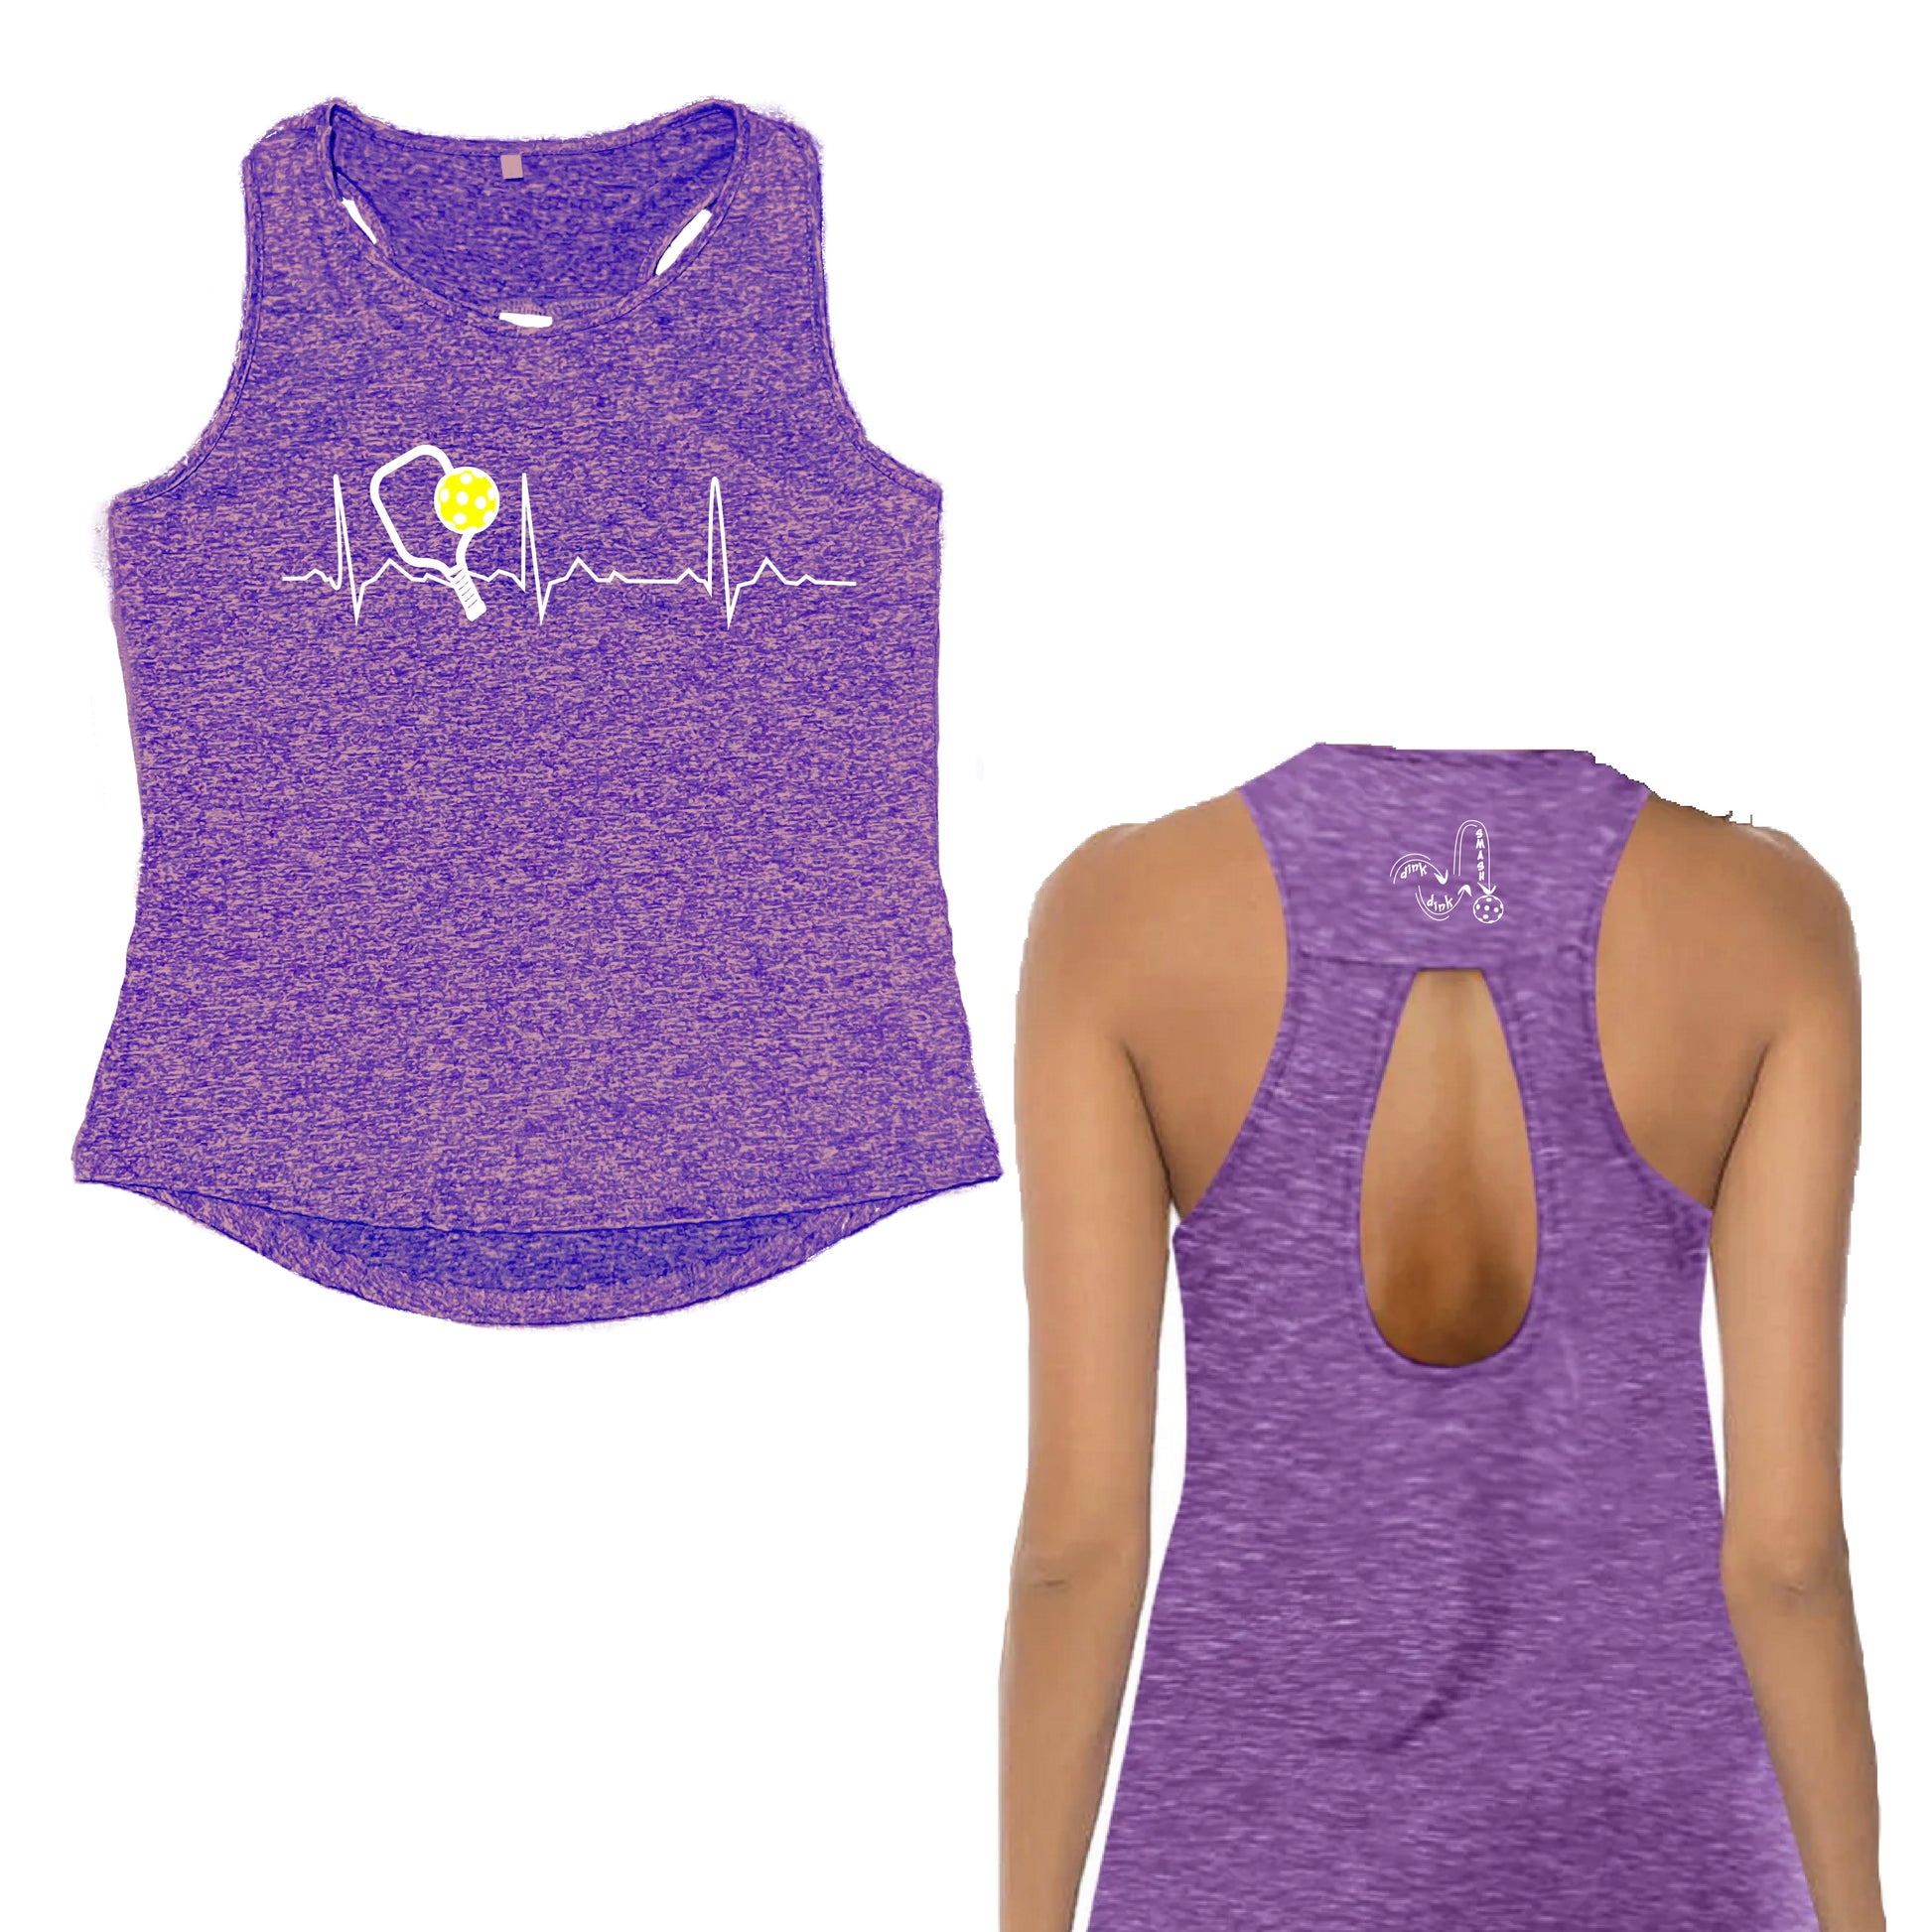 For women who want to look stylish while playing pickleball, this lightweight sleeveless tank with a teardrop back is perfect. The sheer fabric is perfect for layering over your favorite sports bra, fitted or cropped tank for a stylish and trendy look.  The tank is made of 100% polyester moisture-wicking fabric that draws moisture away from the body, ensuring that you stay dry and comfortable throughout the game. 